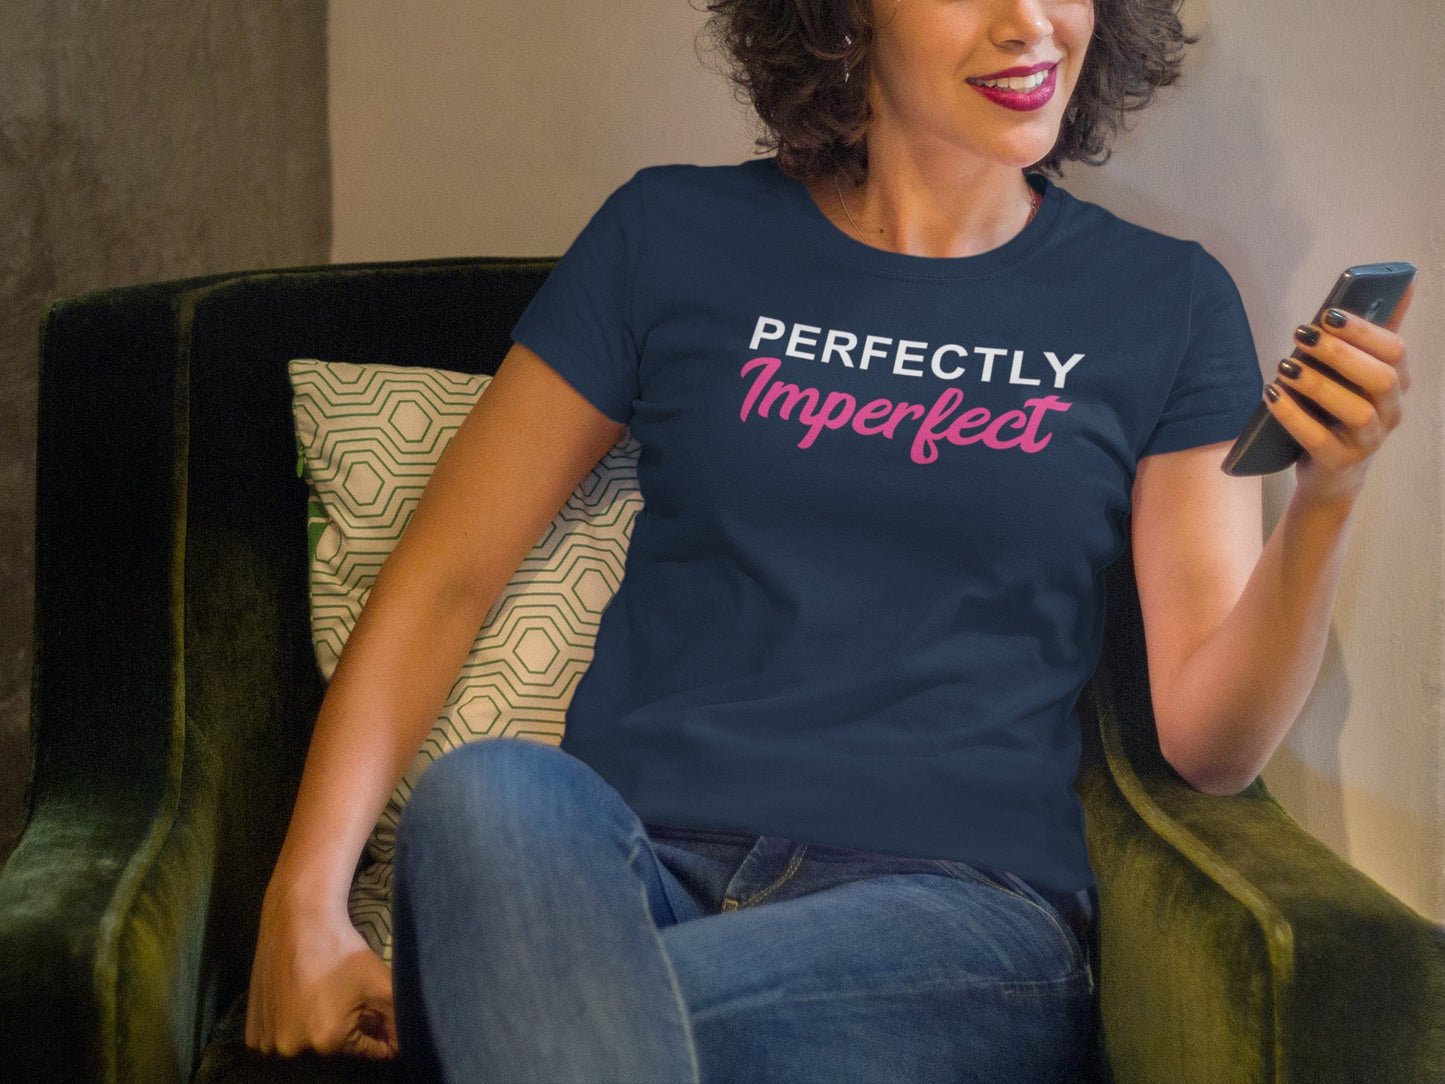 Perfectly Imperfect , Perfect Shirt, Imperfection Shirt, Motivational Shirt, Inspirational Shirt, Faith Shirt, Christian Shirt, Worthy Shirt